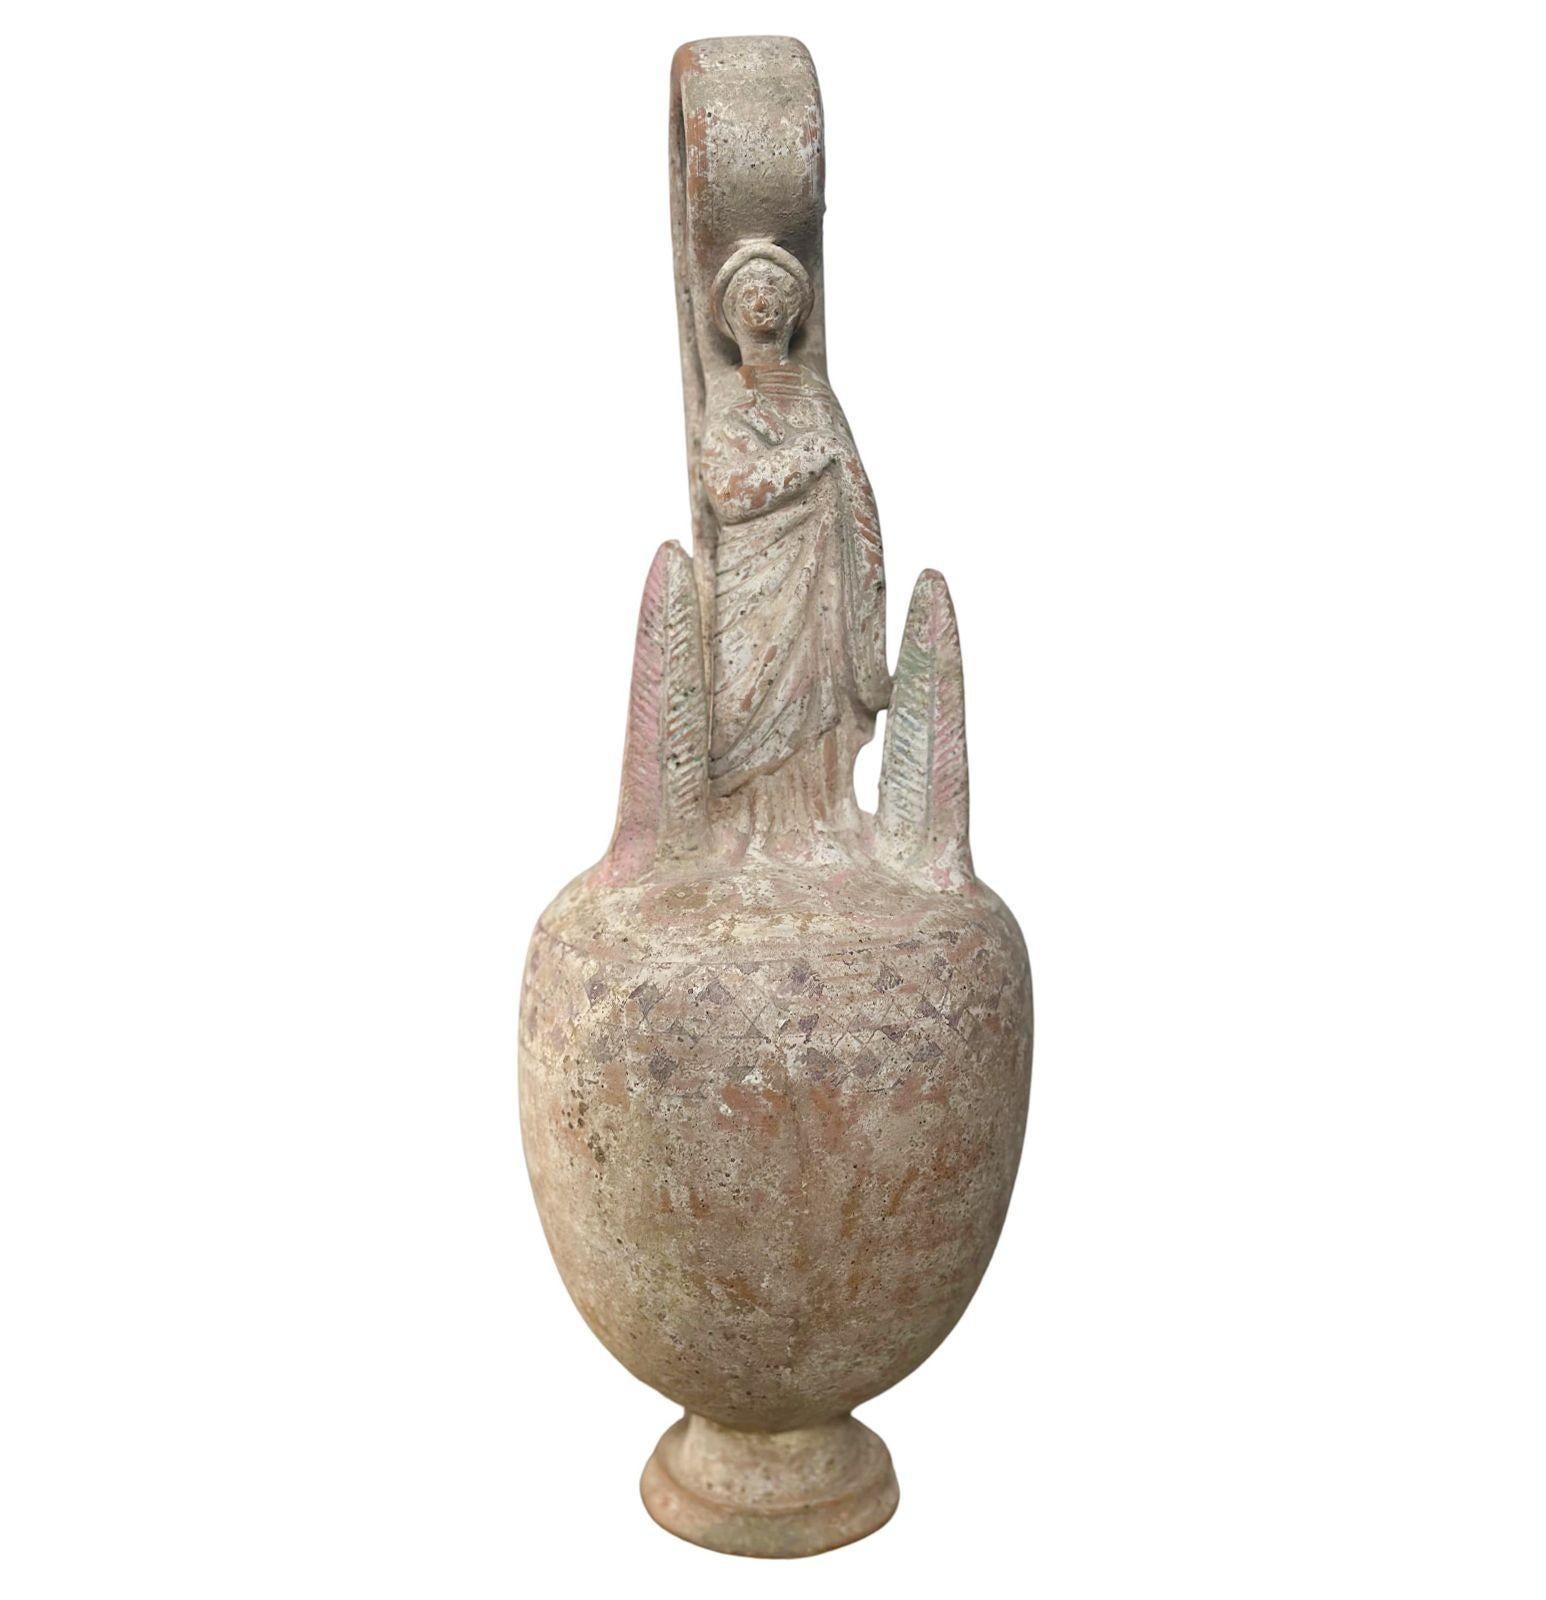 Ancient Greek Canosan terracotta votive vessel made in the c. 4th Century (B.C.). It consists of a tapered bulbous body with a human figure on top wearing a draped garment. The figure is flanked by two leaf figures on each side.
*Information on